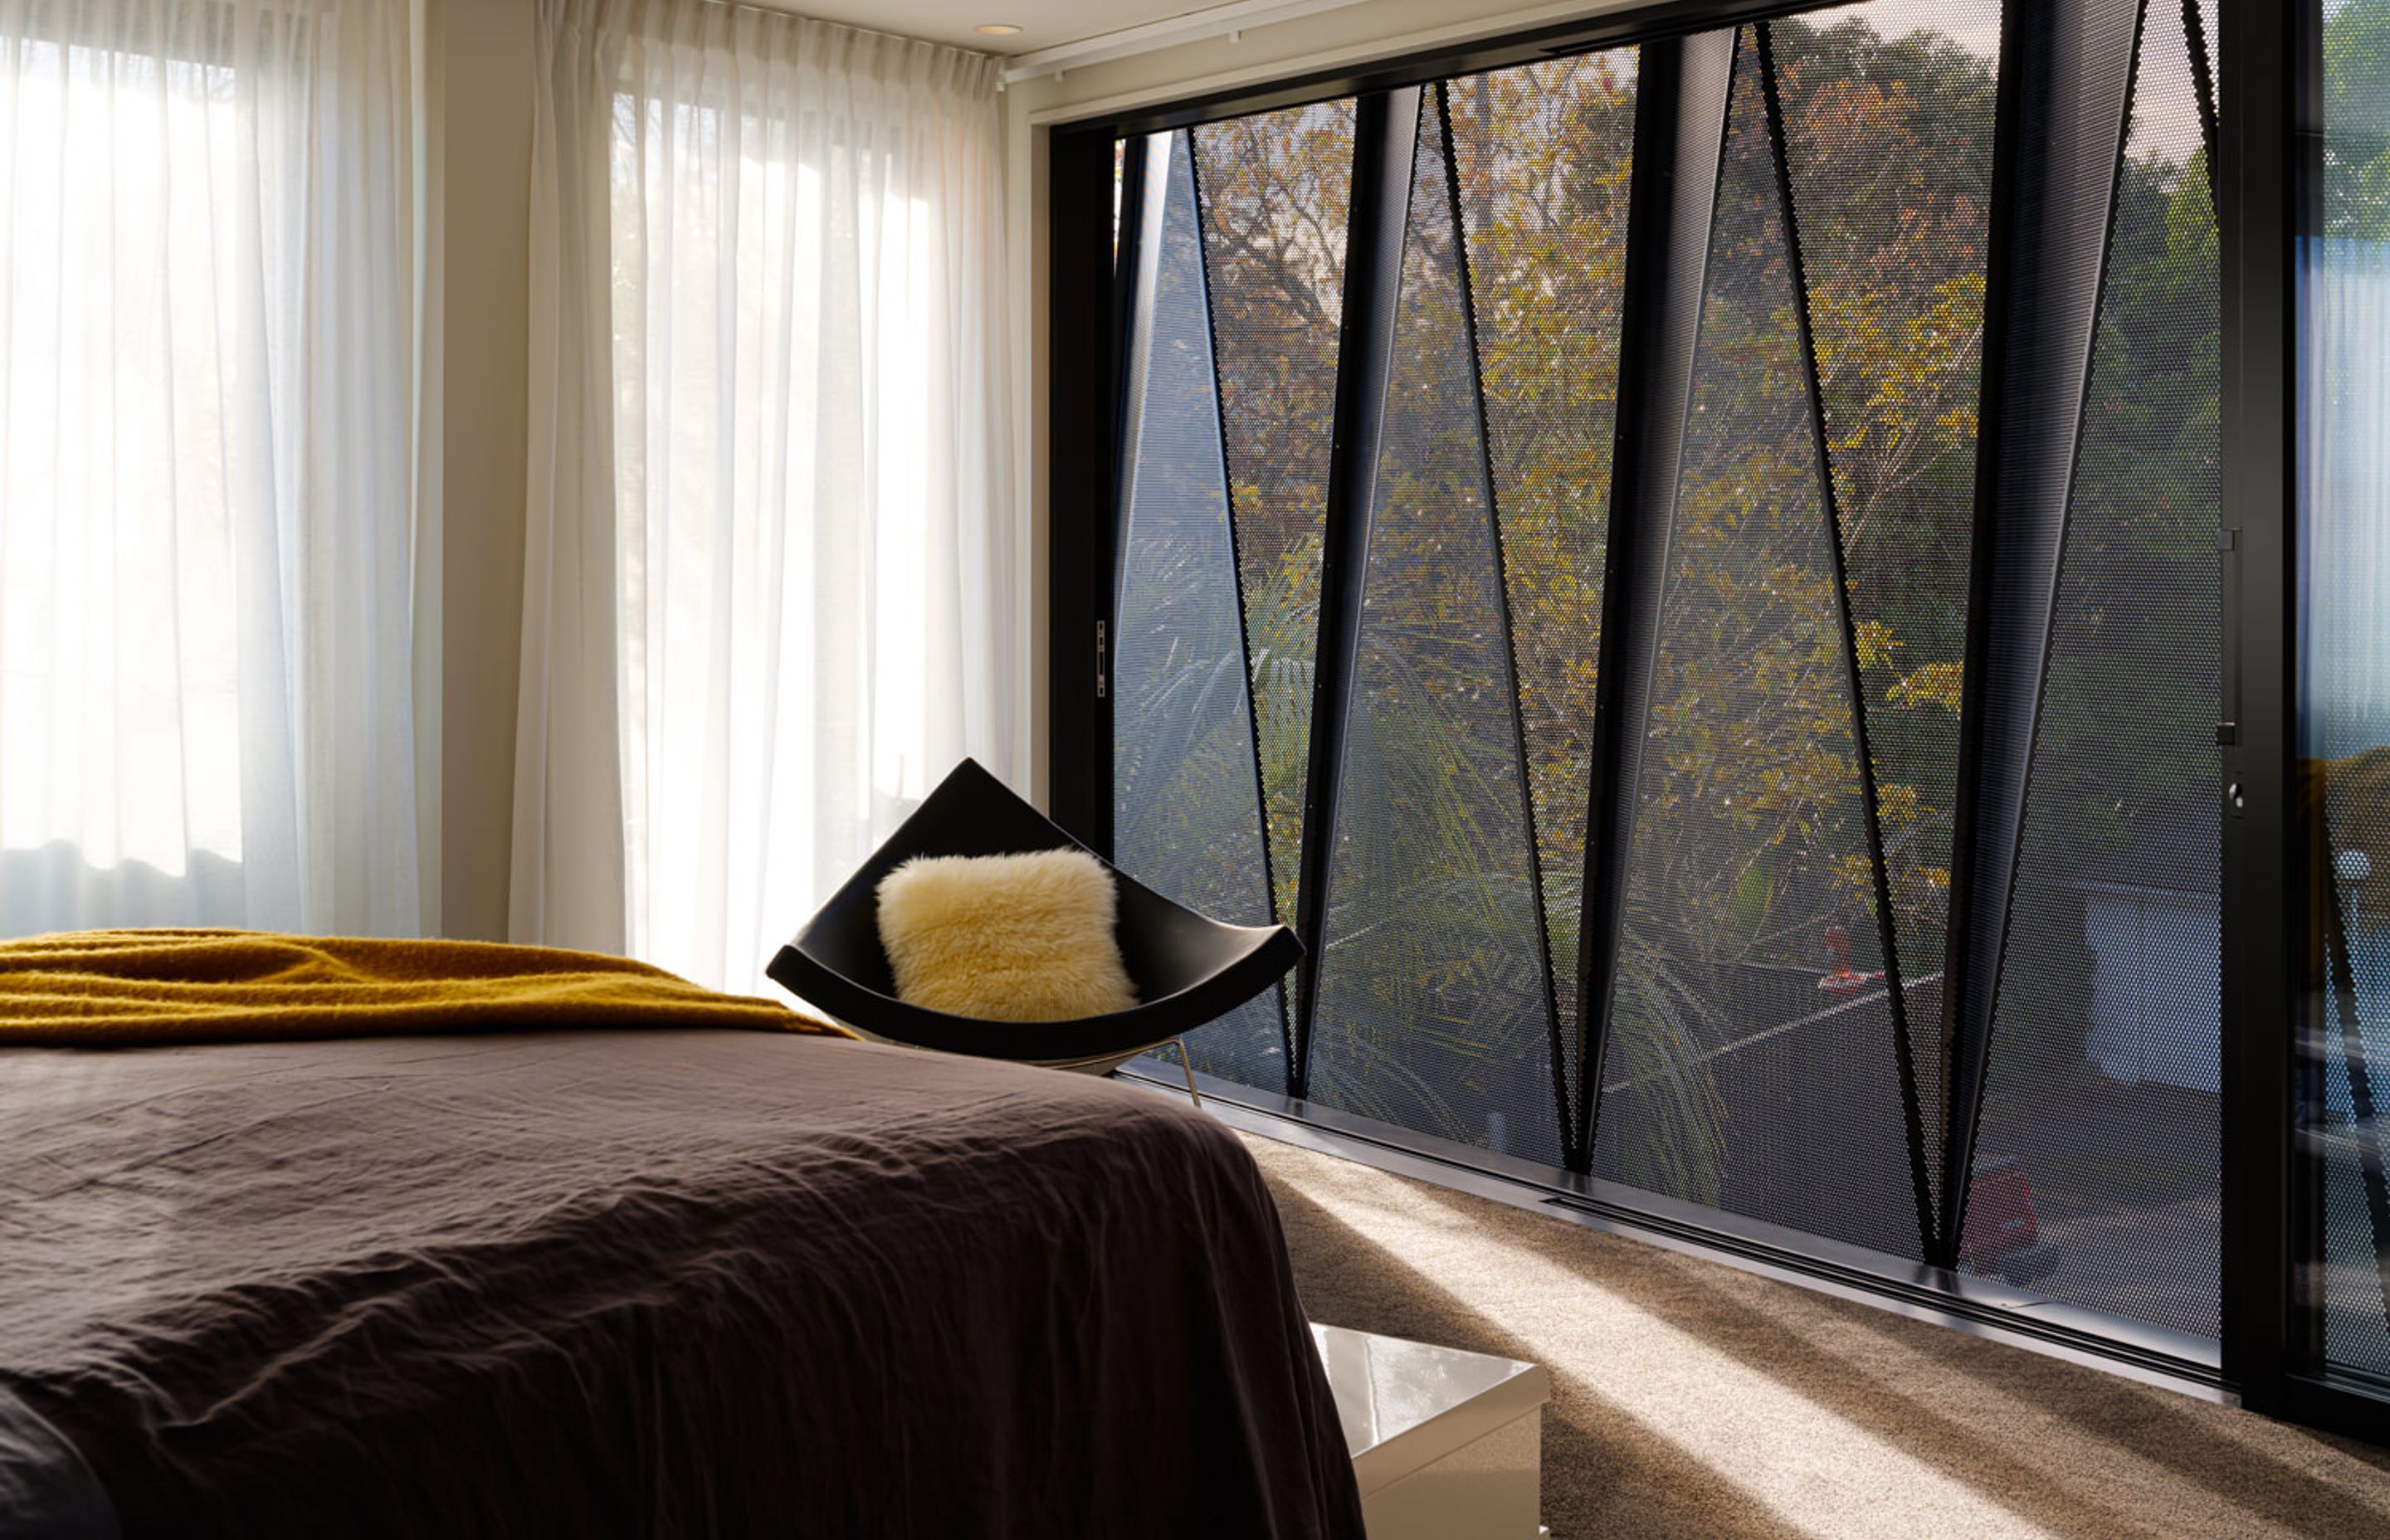 A wide-span sliding door in the main bedroom allows for natural ventilation. Sheer curtains on the north-facing facade allow for diffuse light throughout the day.